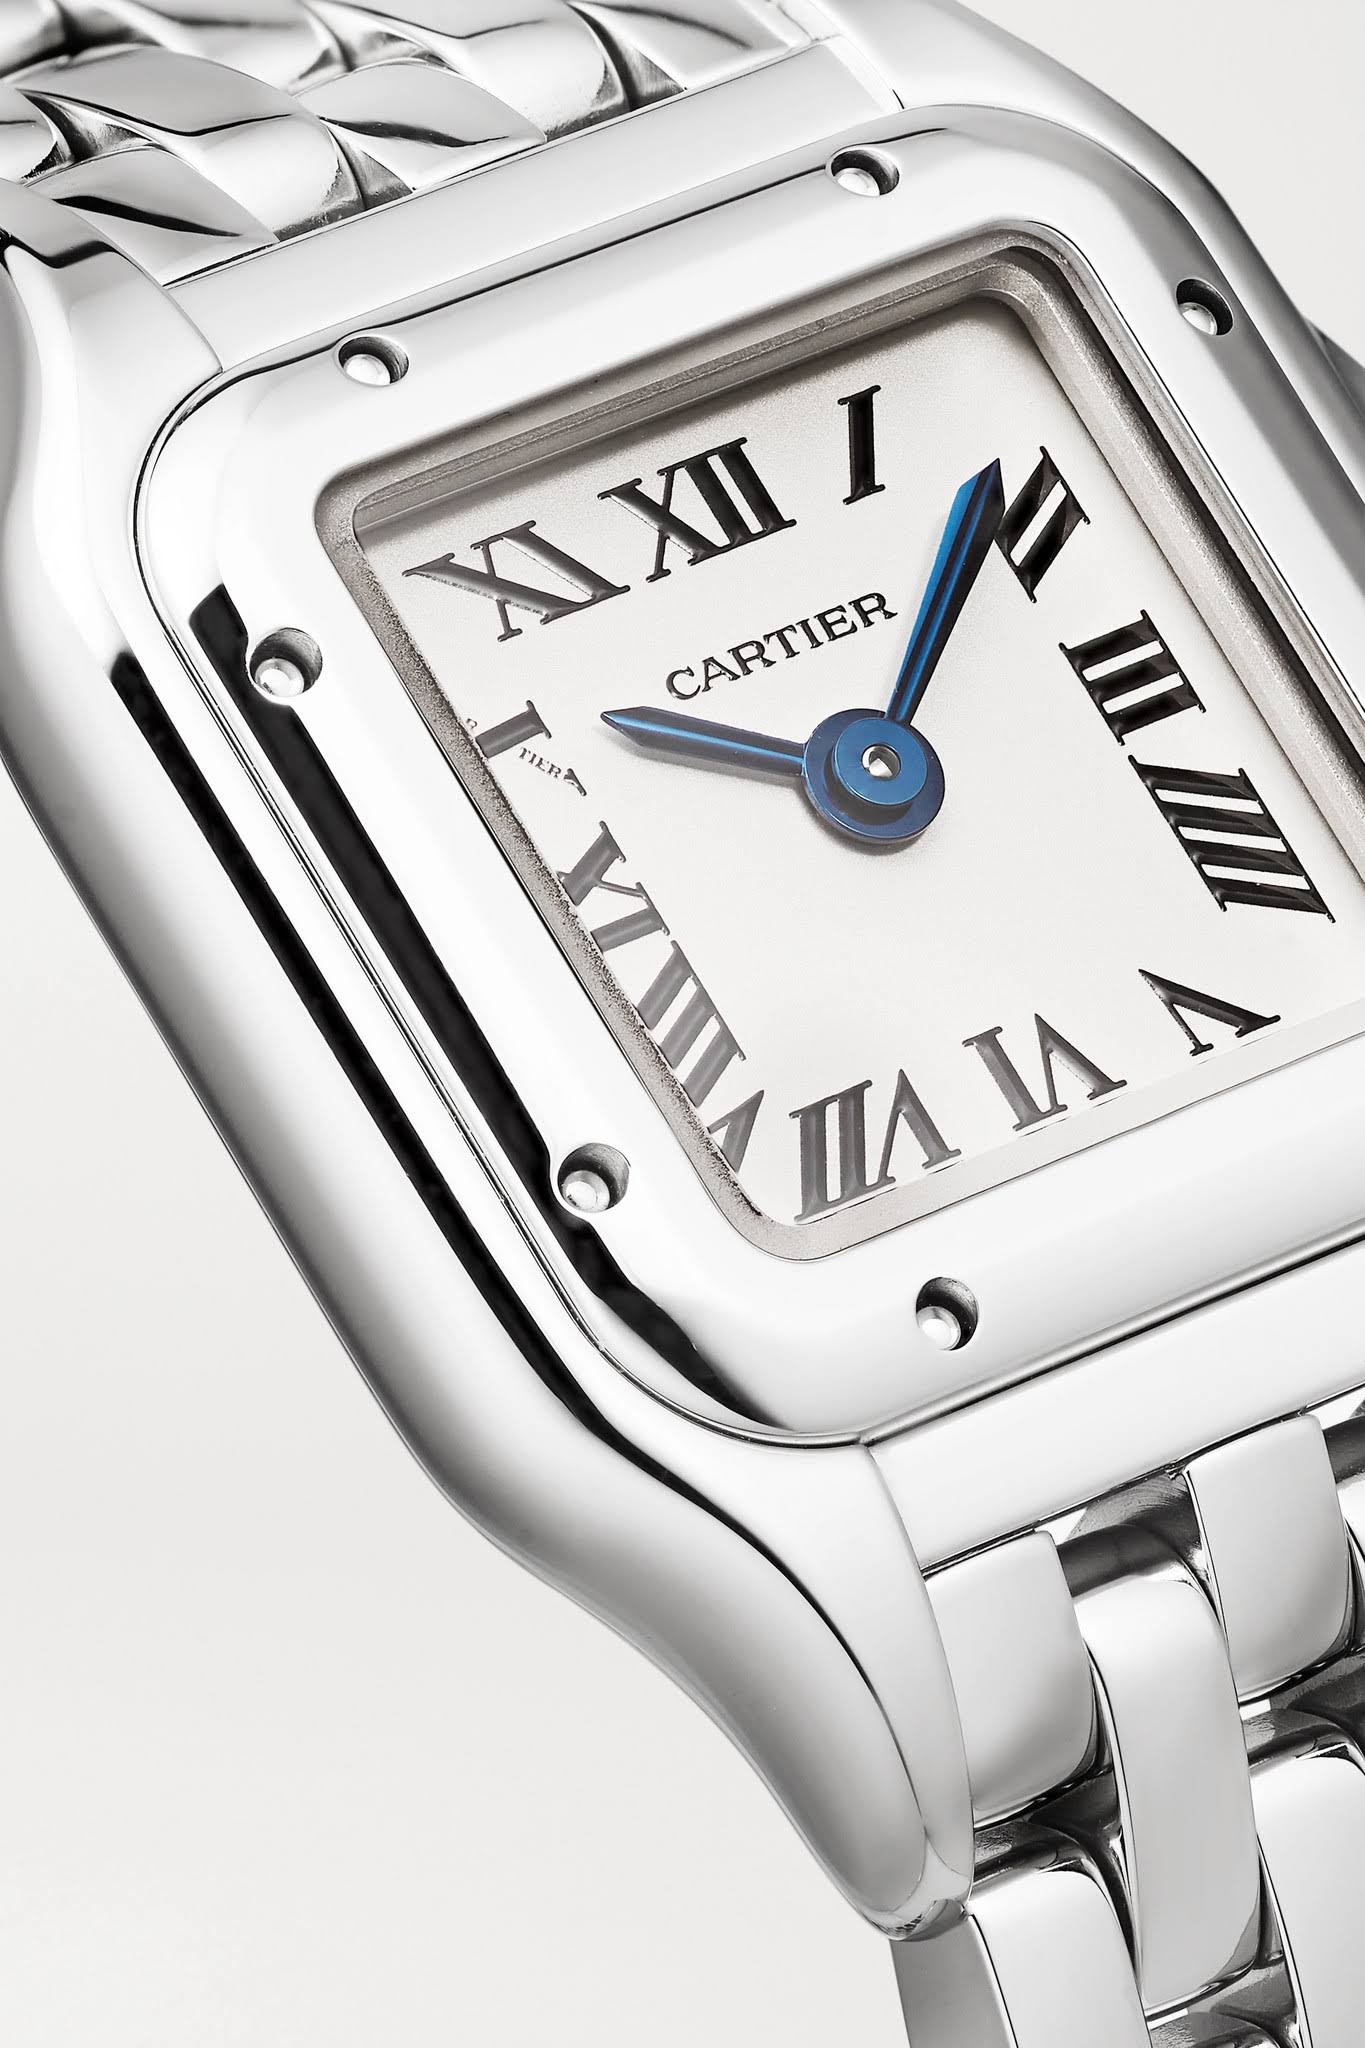 Cartier Panthere Mini Silver Dial Ladies Watch WSPN0019